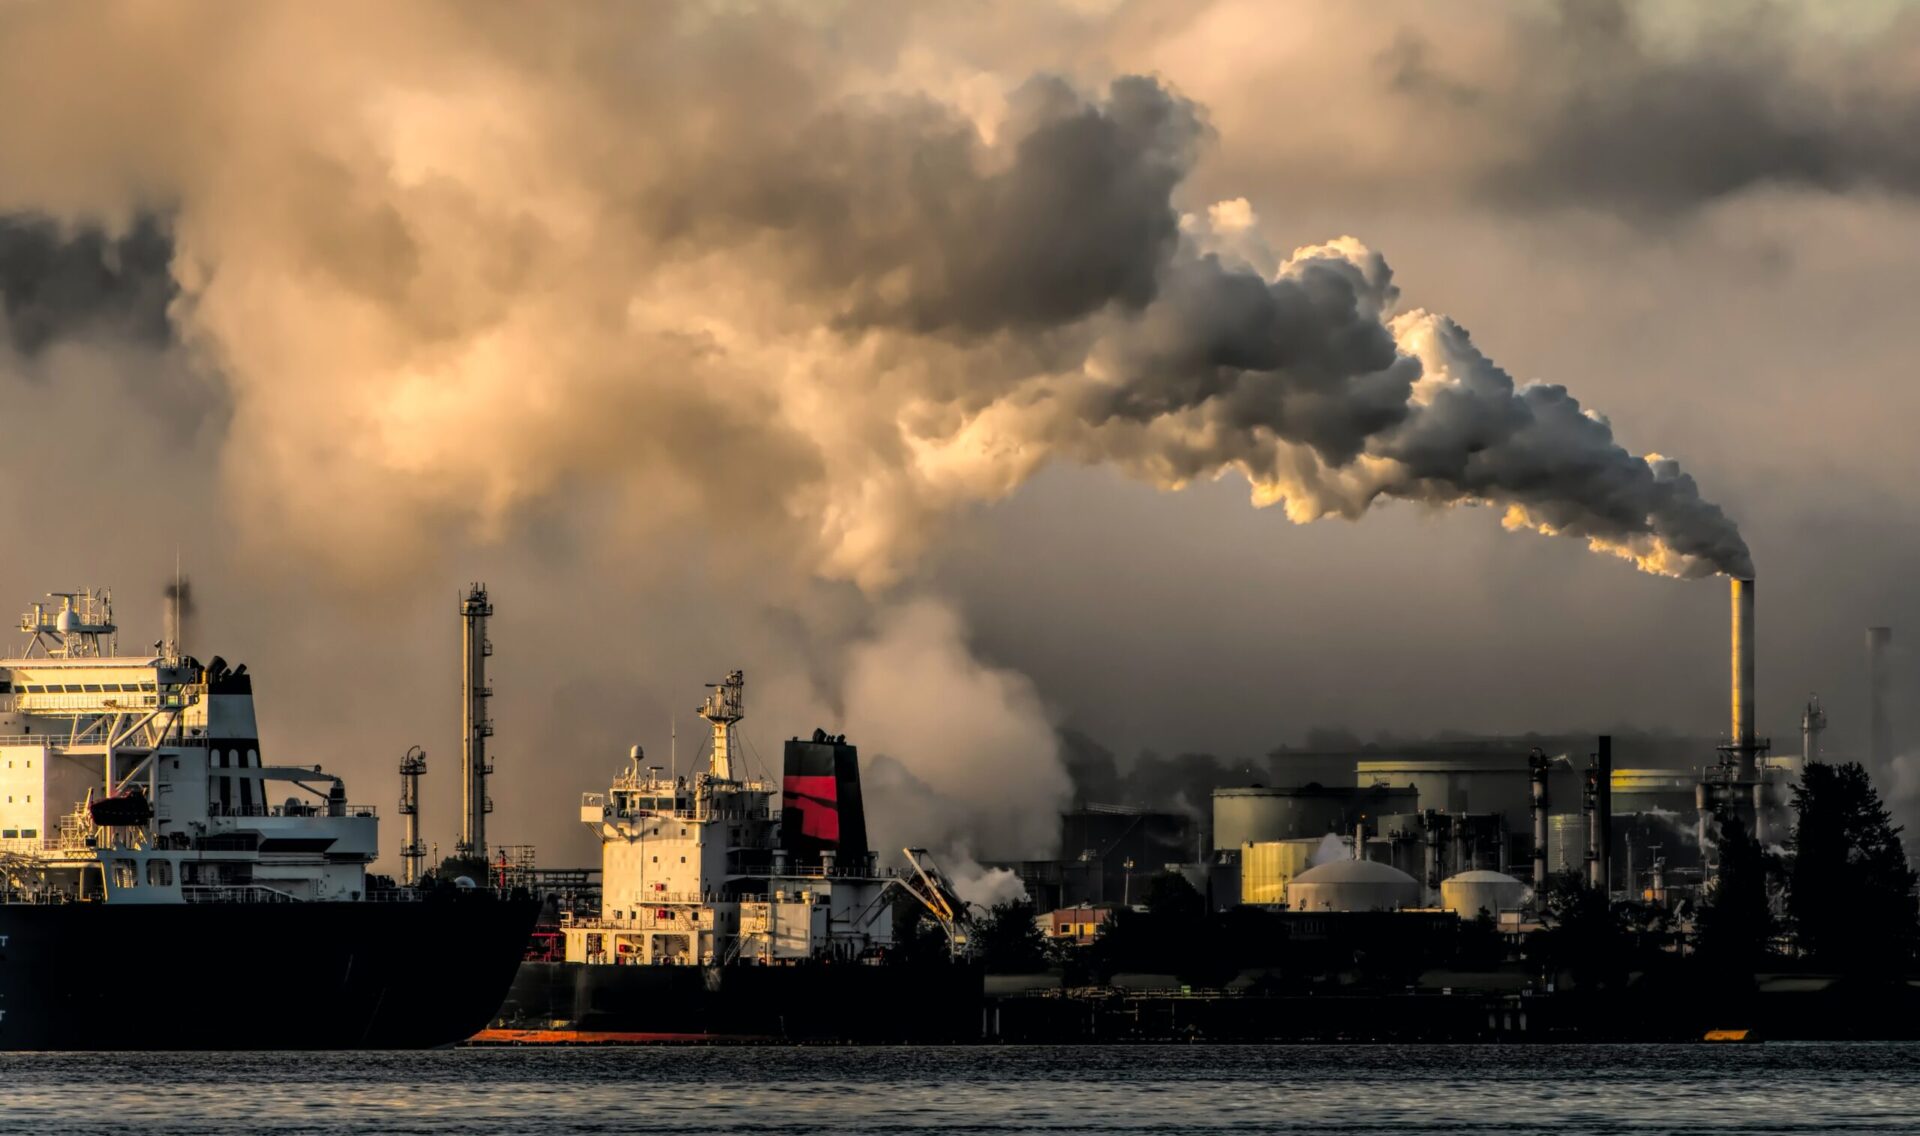 Gloomy image of a refinery and pollution